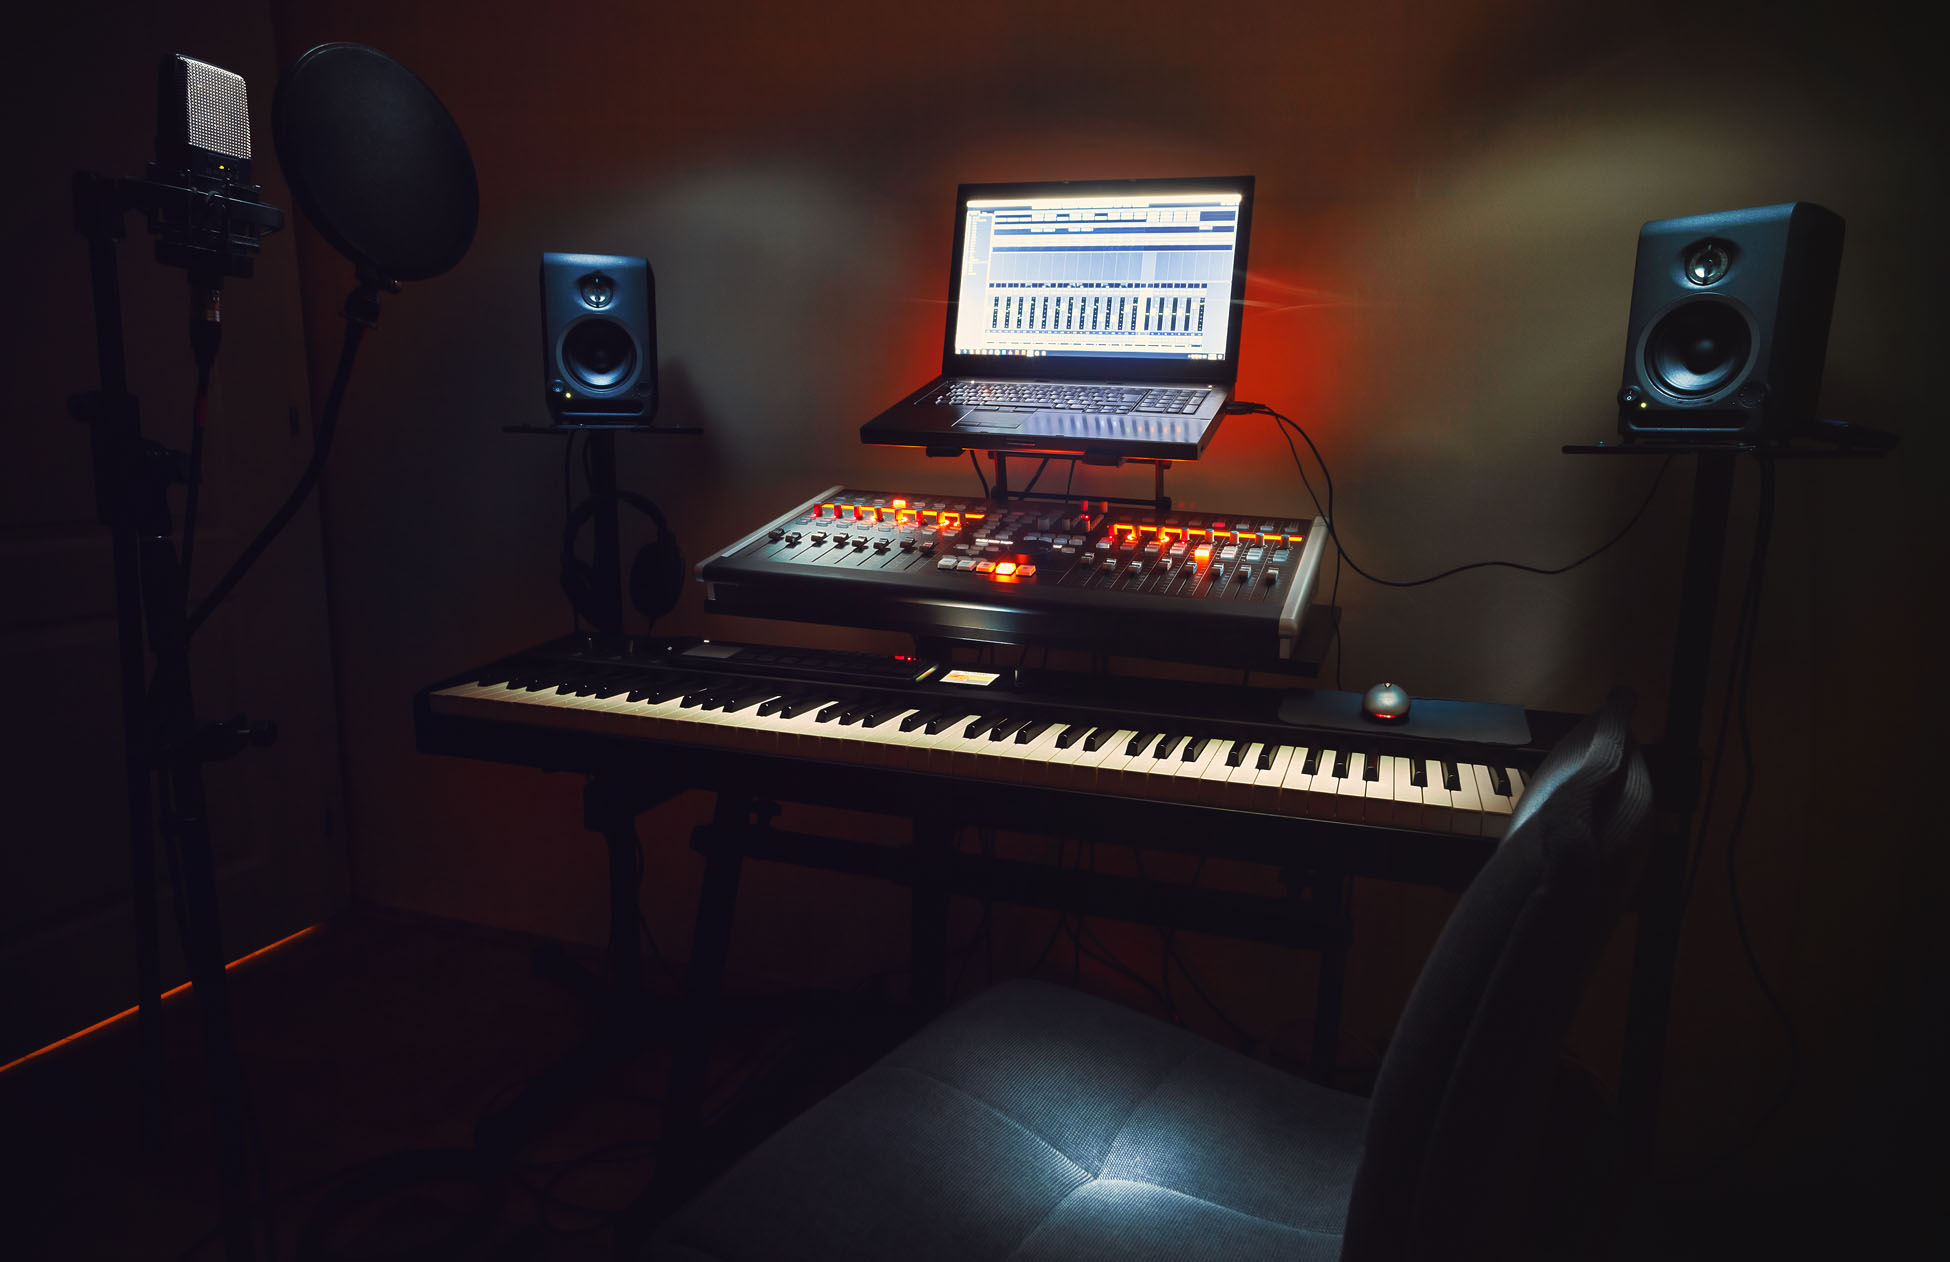 Interior of a small bedroom recording studio, details of equipment, microphone in foreground and modern mixing console with laptop in background.